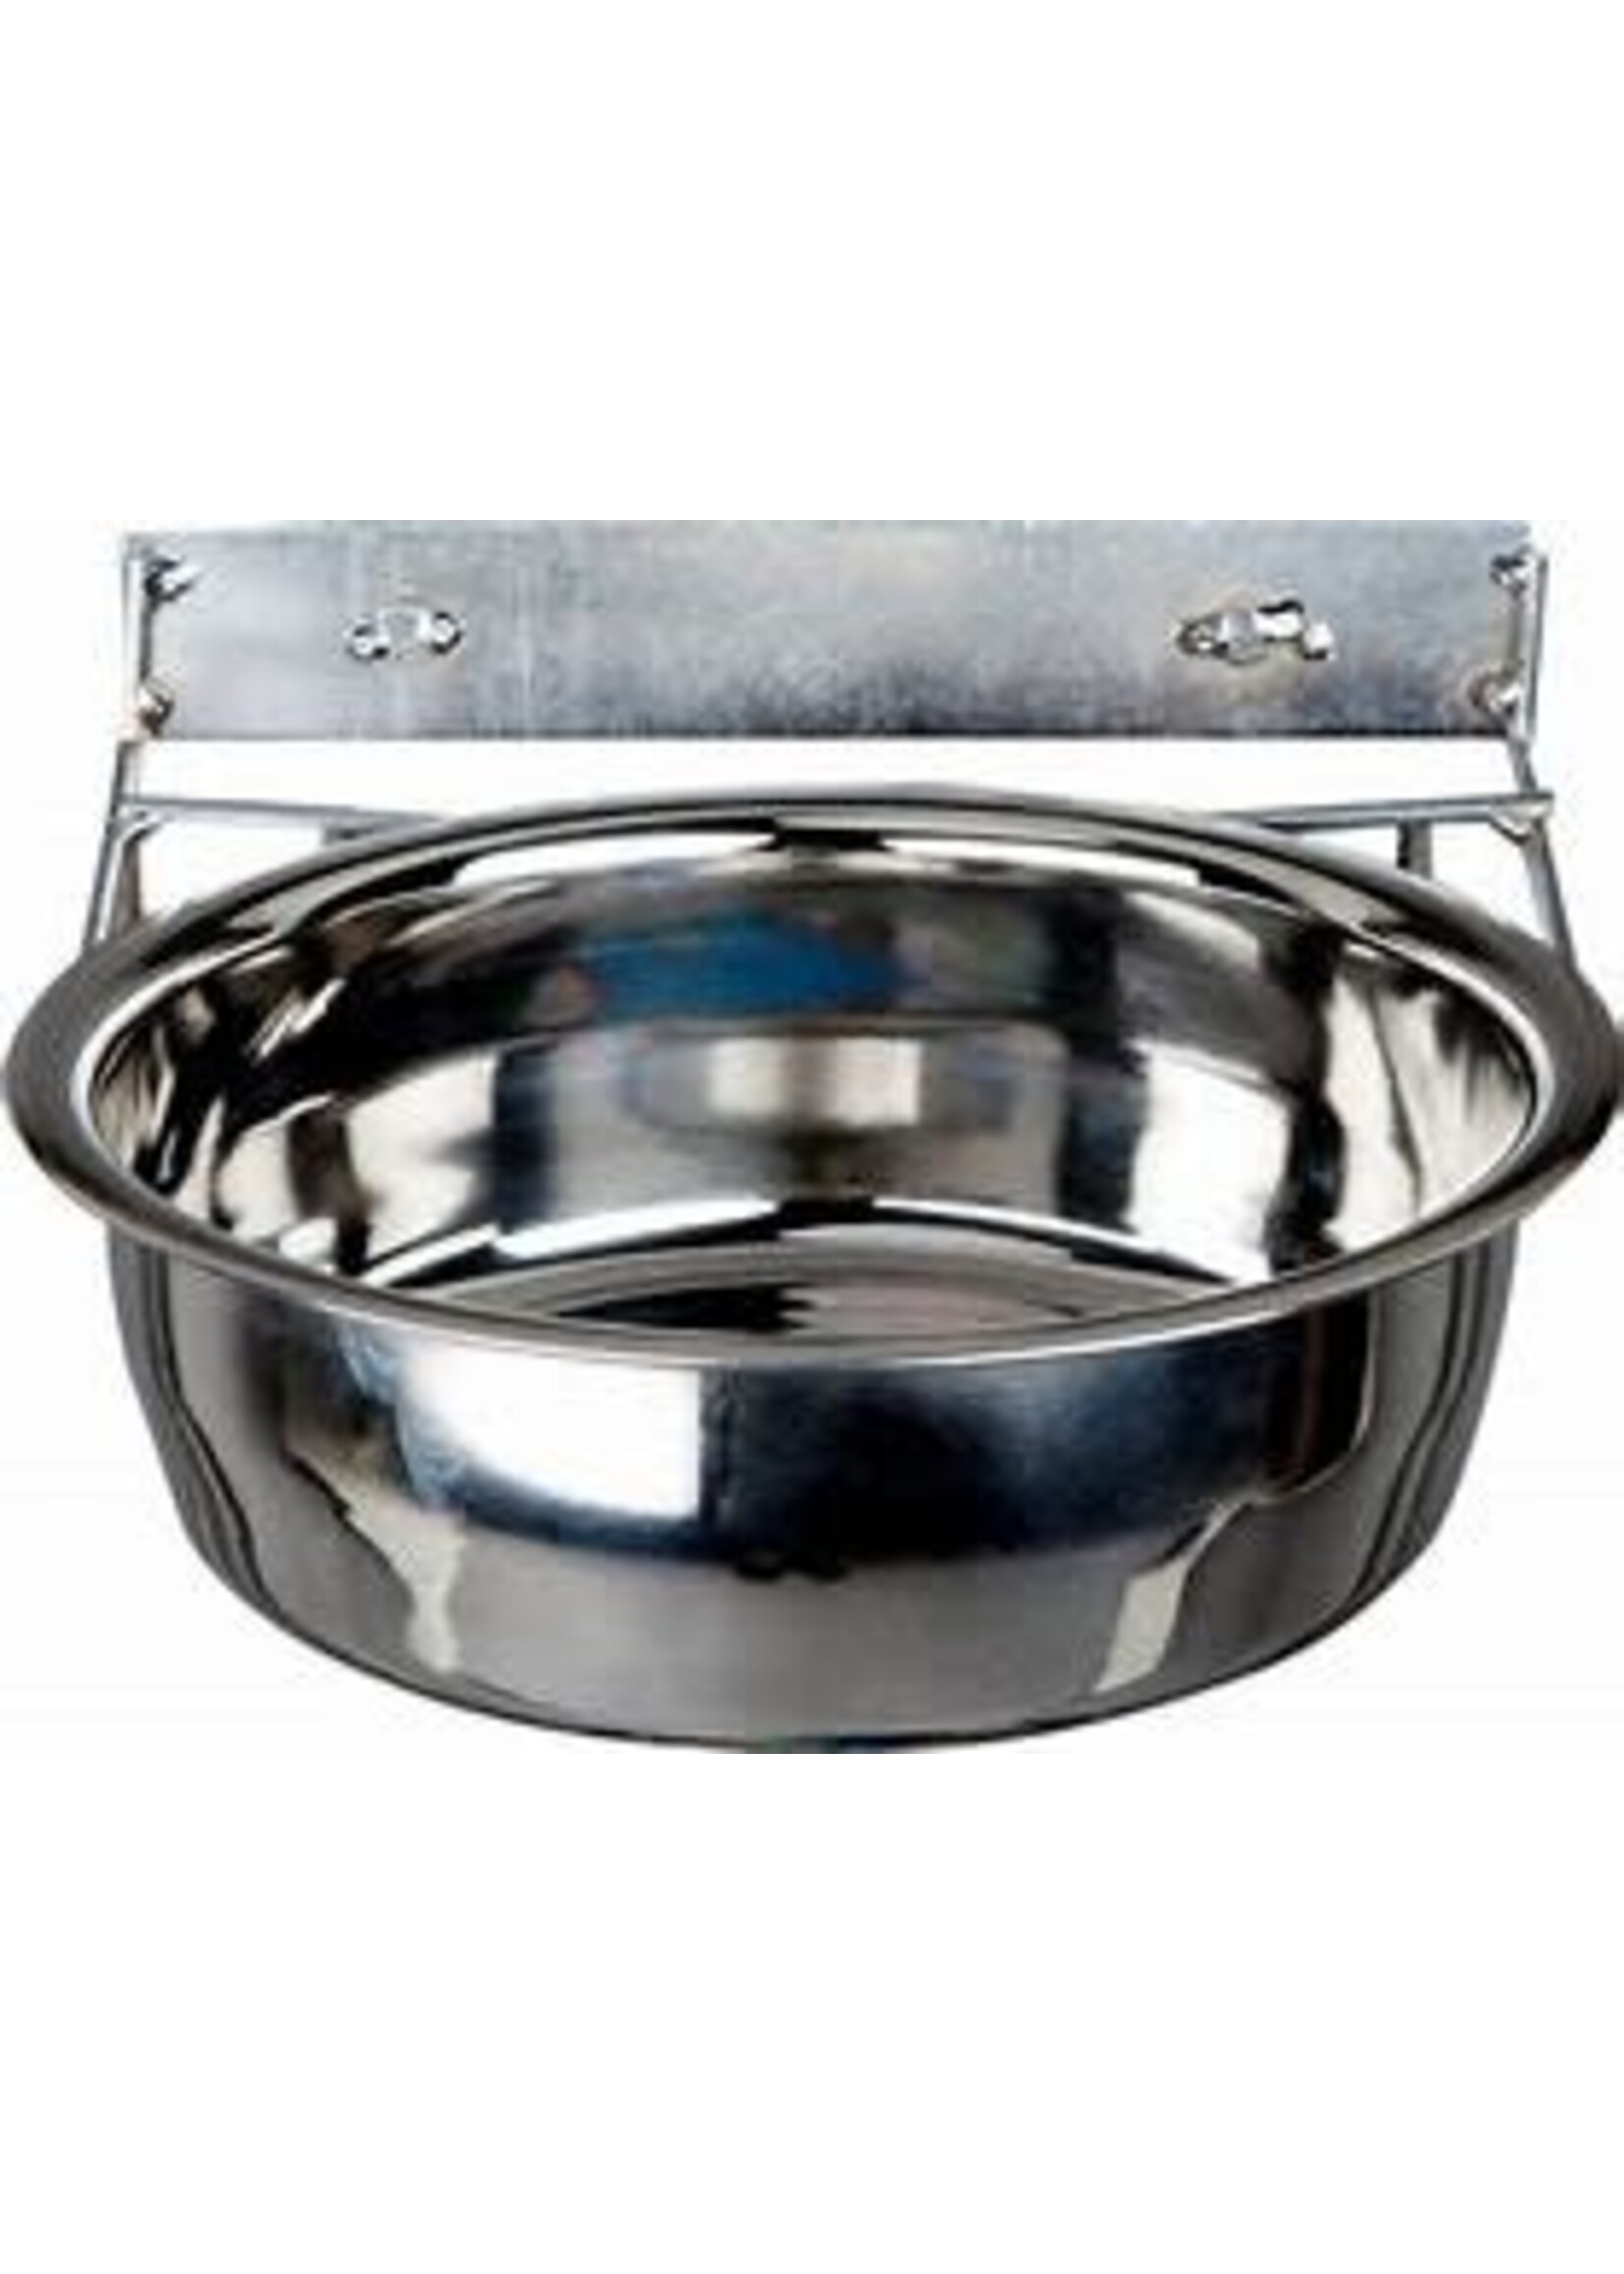 Burgham Burgham Stainless Steel Dish with Clamp Holder 64oz